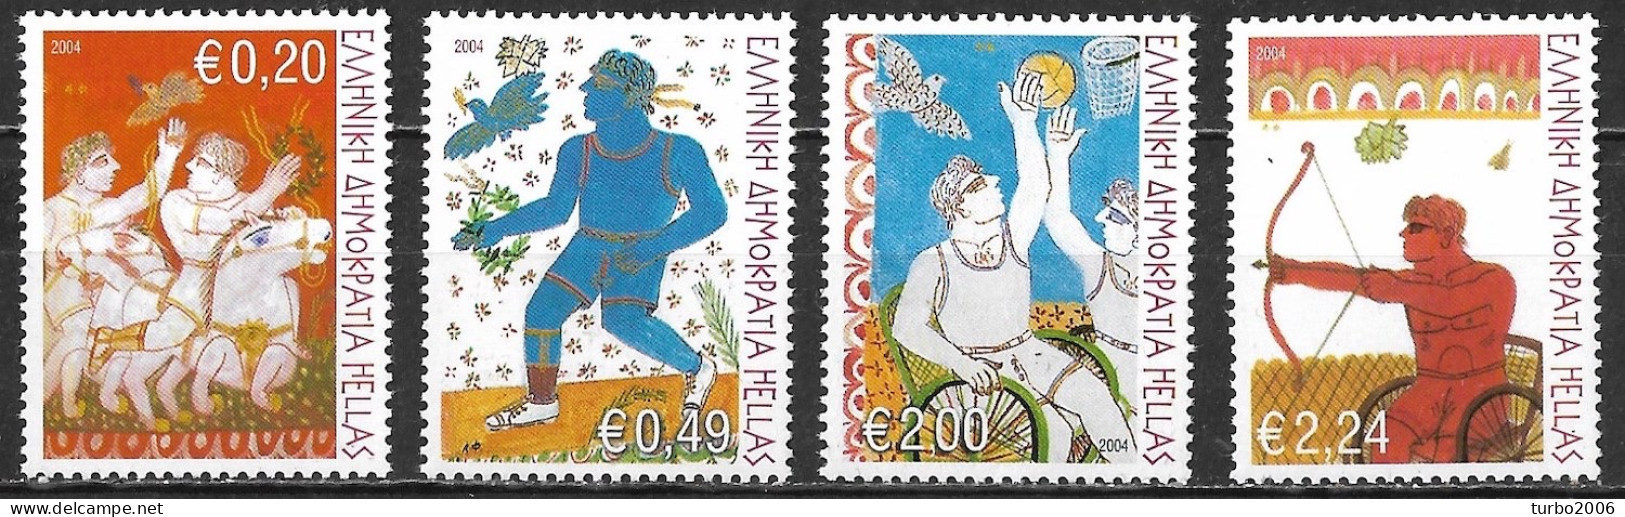 GREECE 2004 The Power Of Will Complete MNH Set Vl. 2249 / 2252 - Unused Stamps